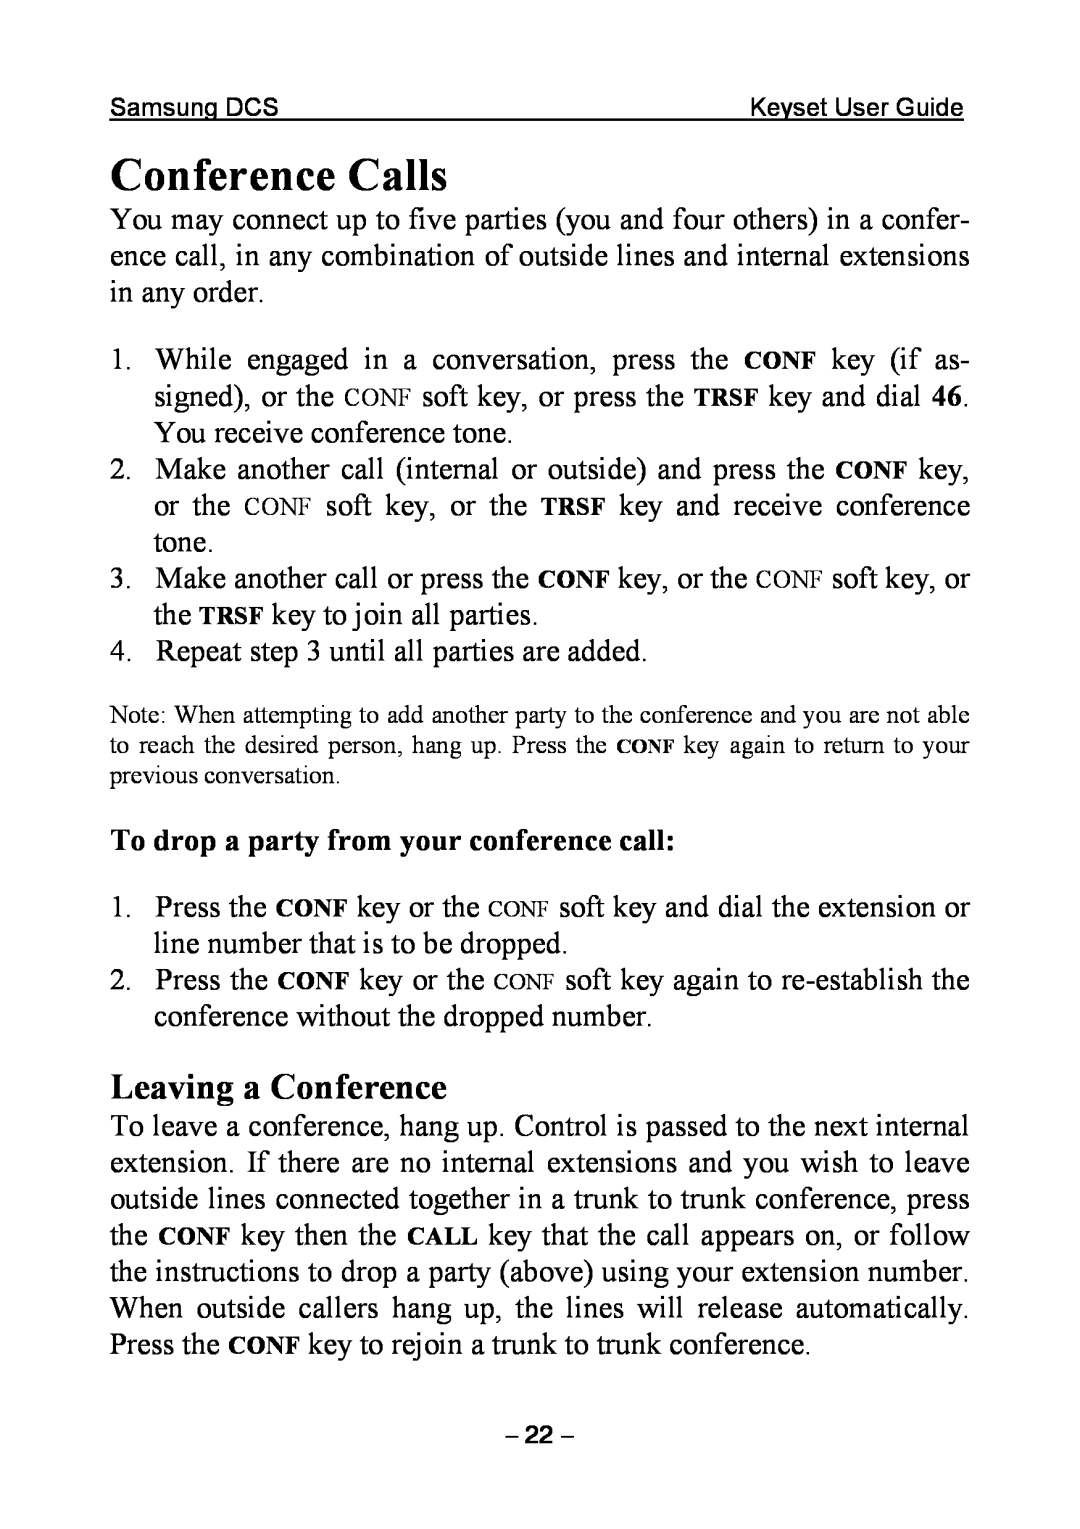 Samsung DCS KEYSET manual Conference Calls, Leaving a Conference, To drop a party from your conference call 